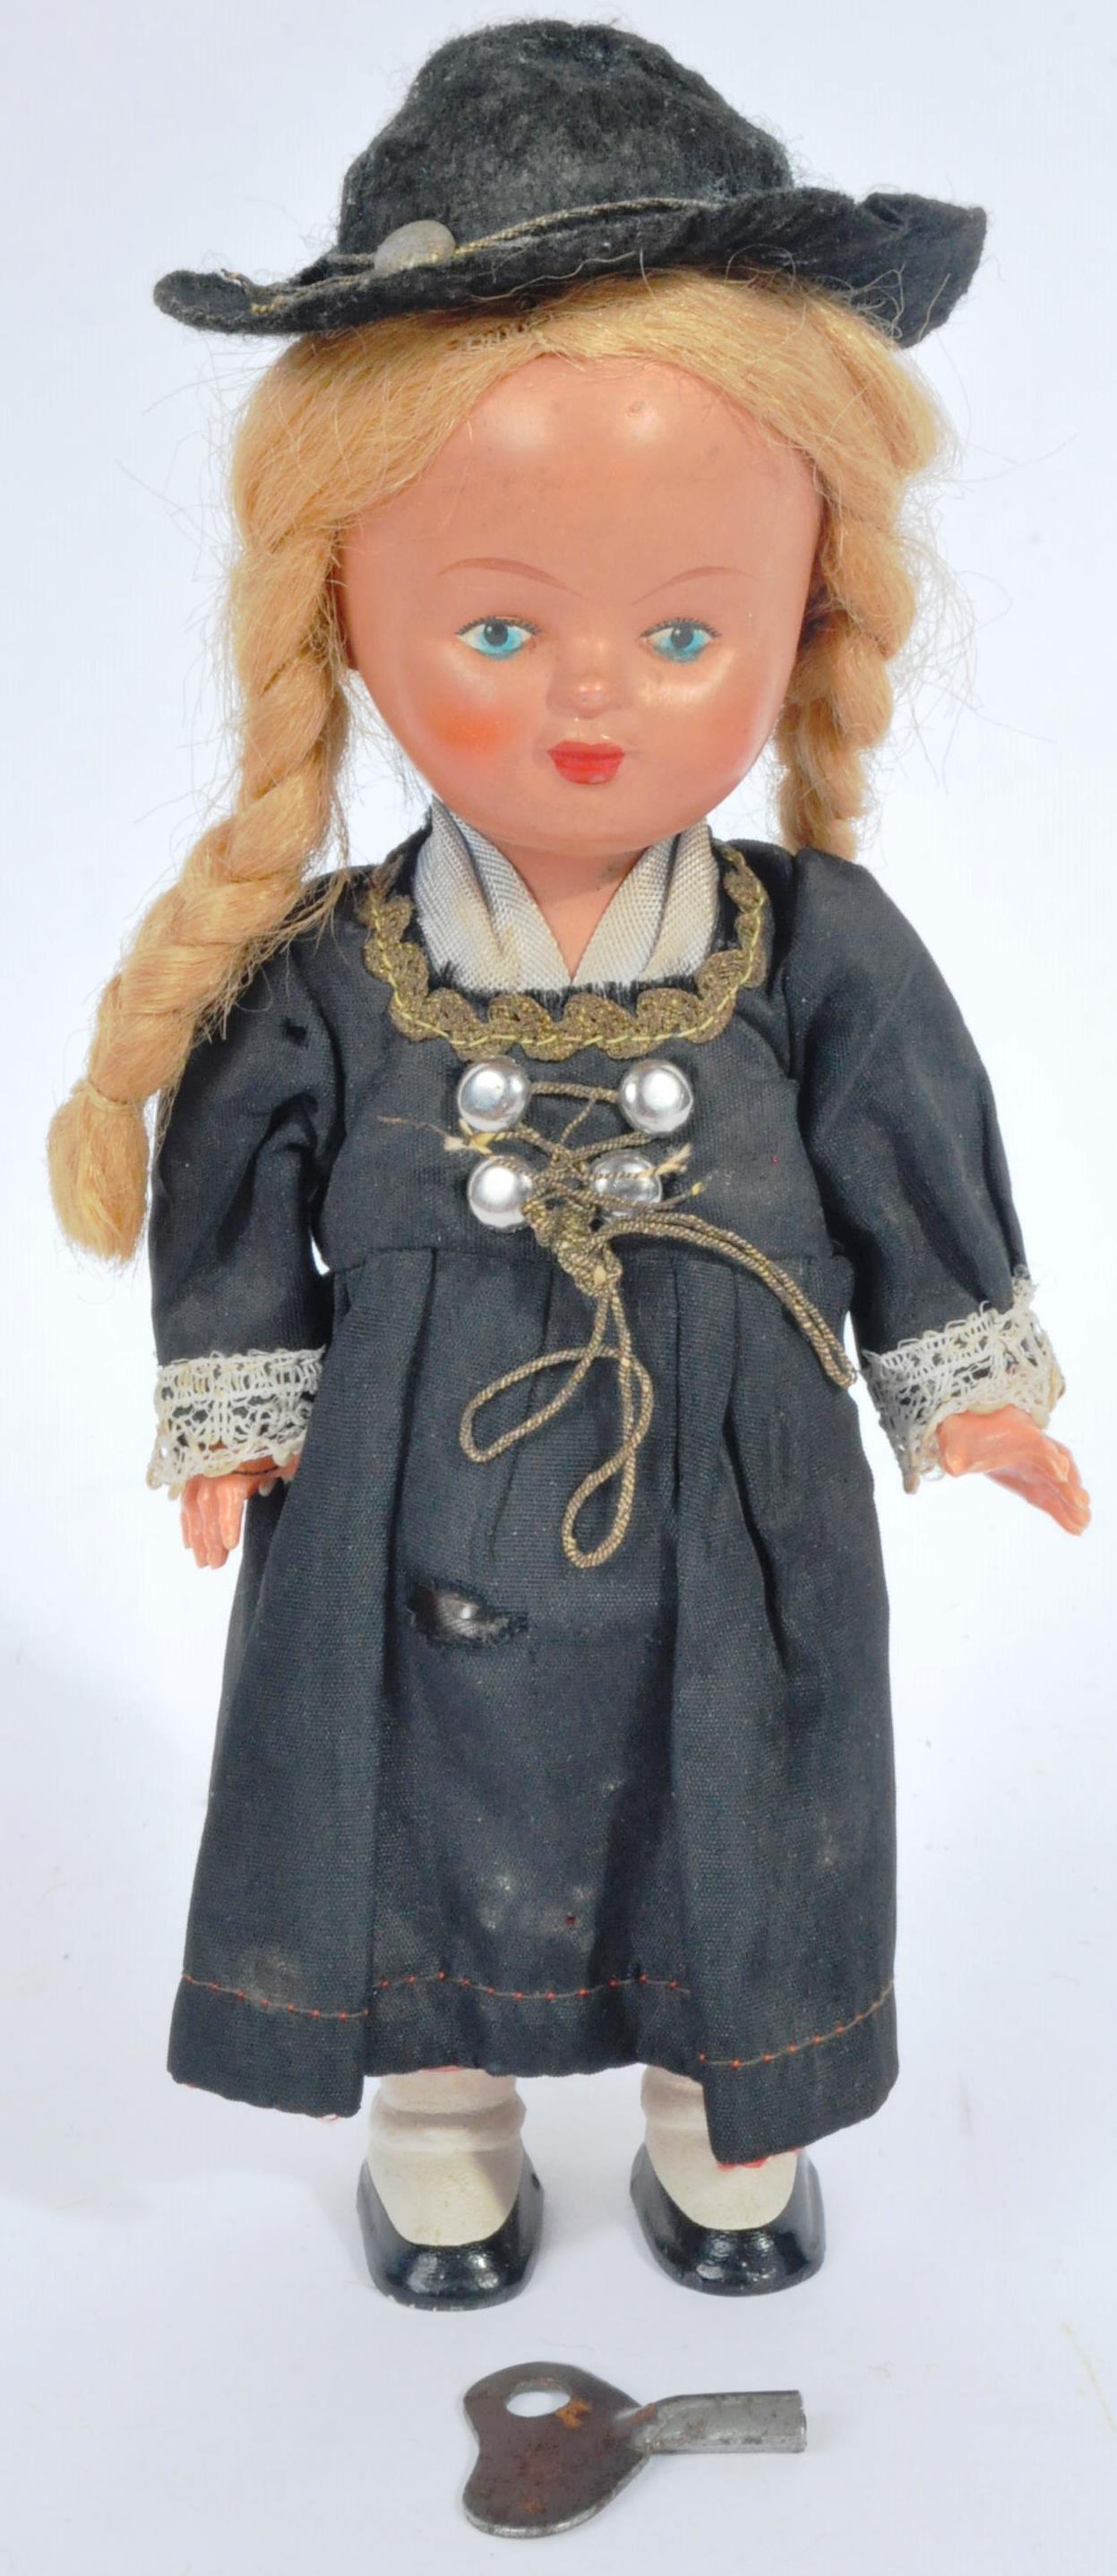 VINTAGE ENGLISH TEDDY BEAR AND GERMAN SCHUCO DOLL - Image 5 of 8